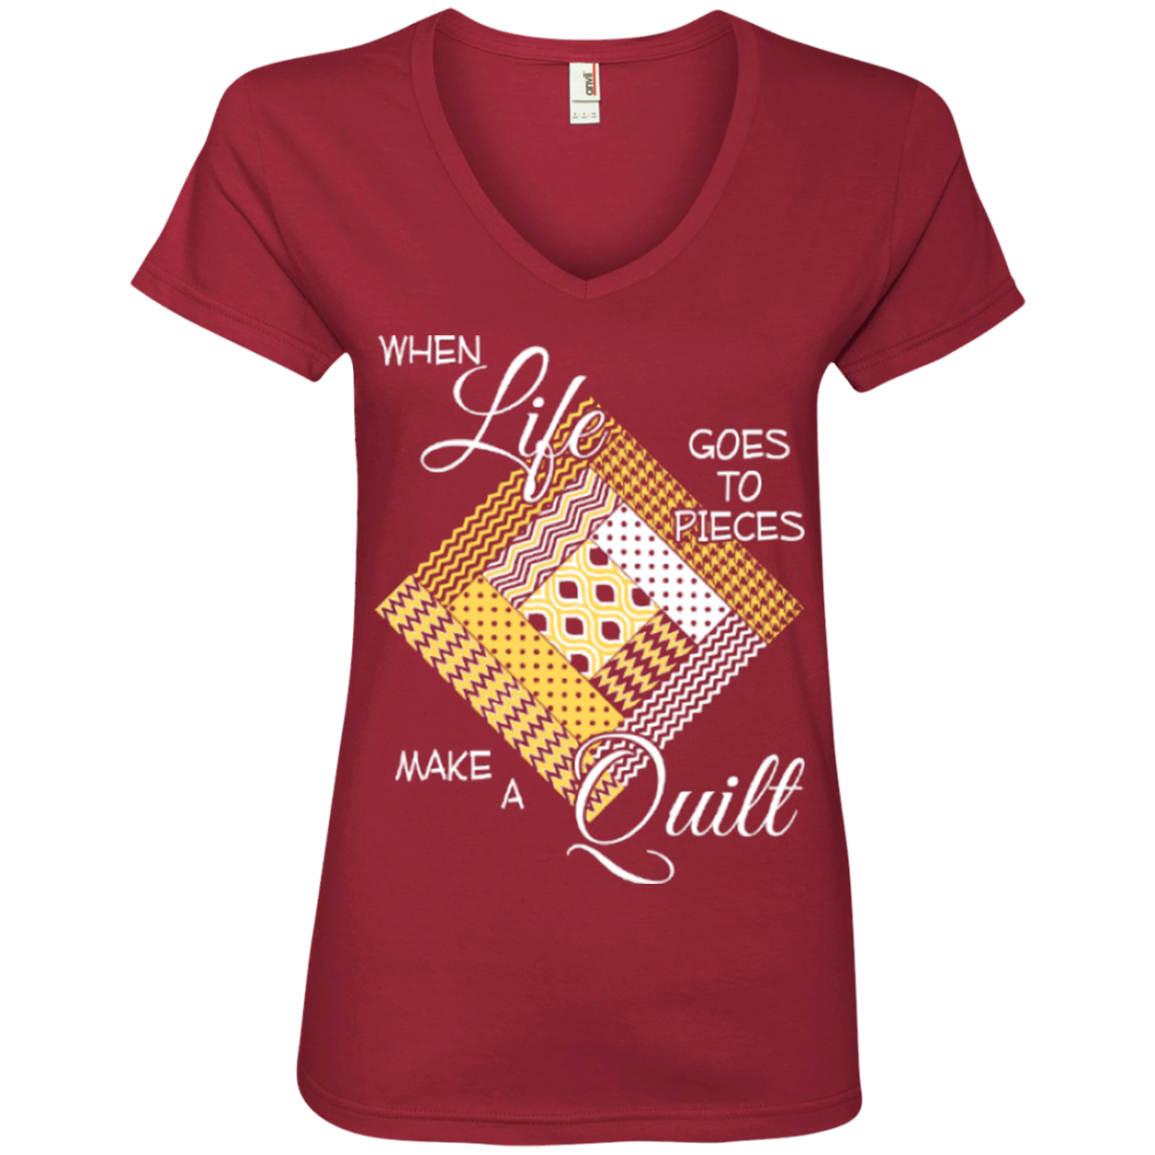 Make a Quilt (yellow) Ladies V-Neck Tee - Crafter4Life - 4